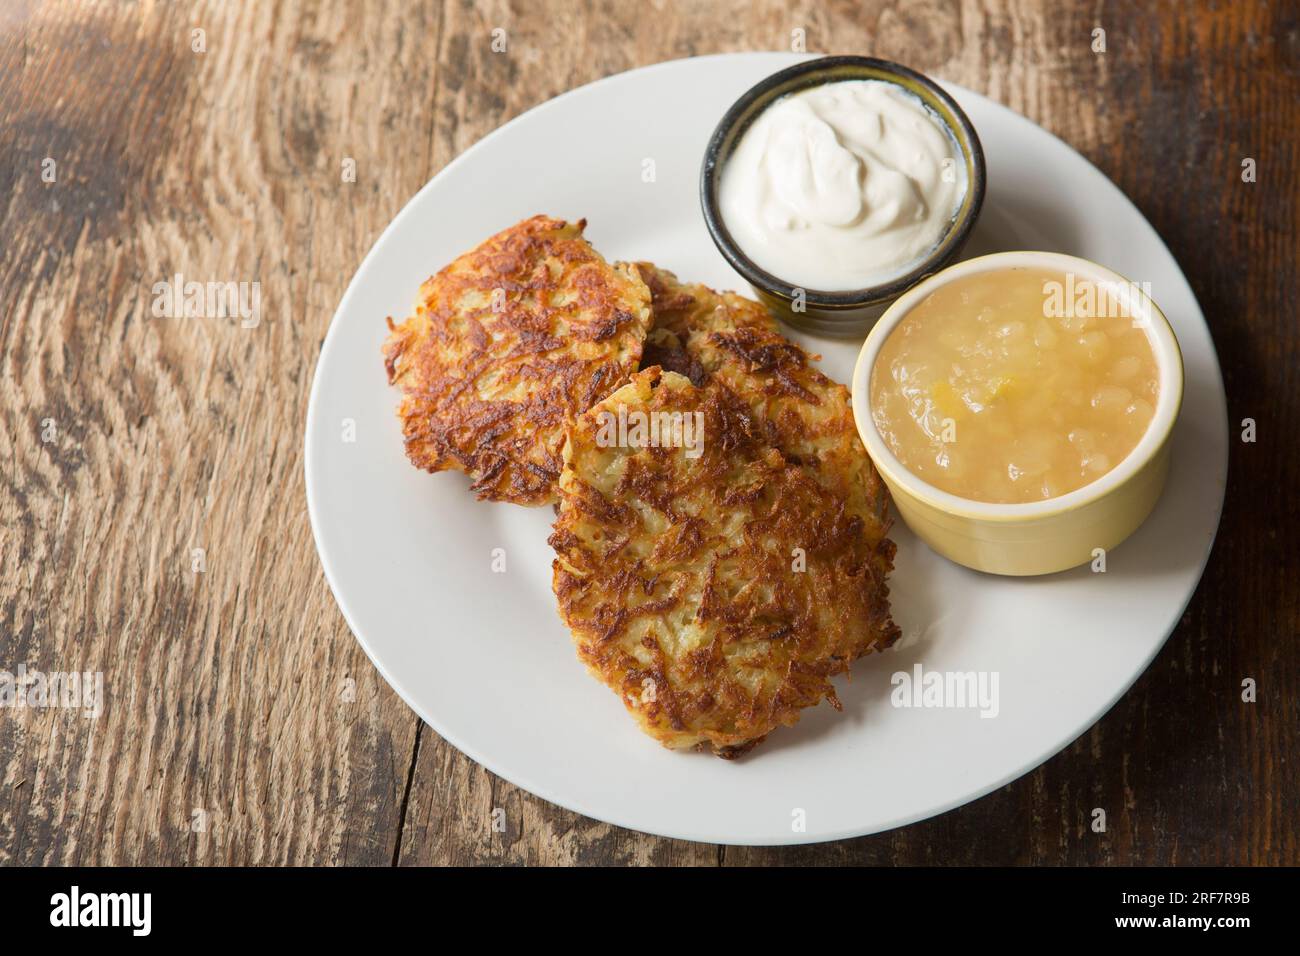 Homemade Polish potato pancakes made from grated potato, flour, egg and onion that have been fried in oil. Served with soured cream and apple sauce. E Stock Photo